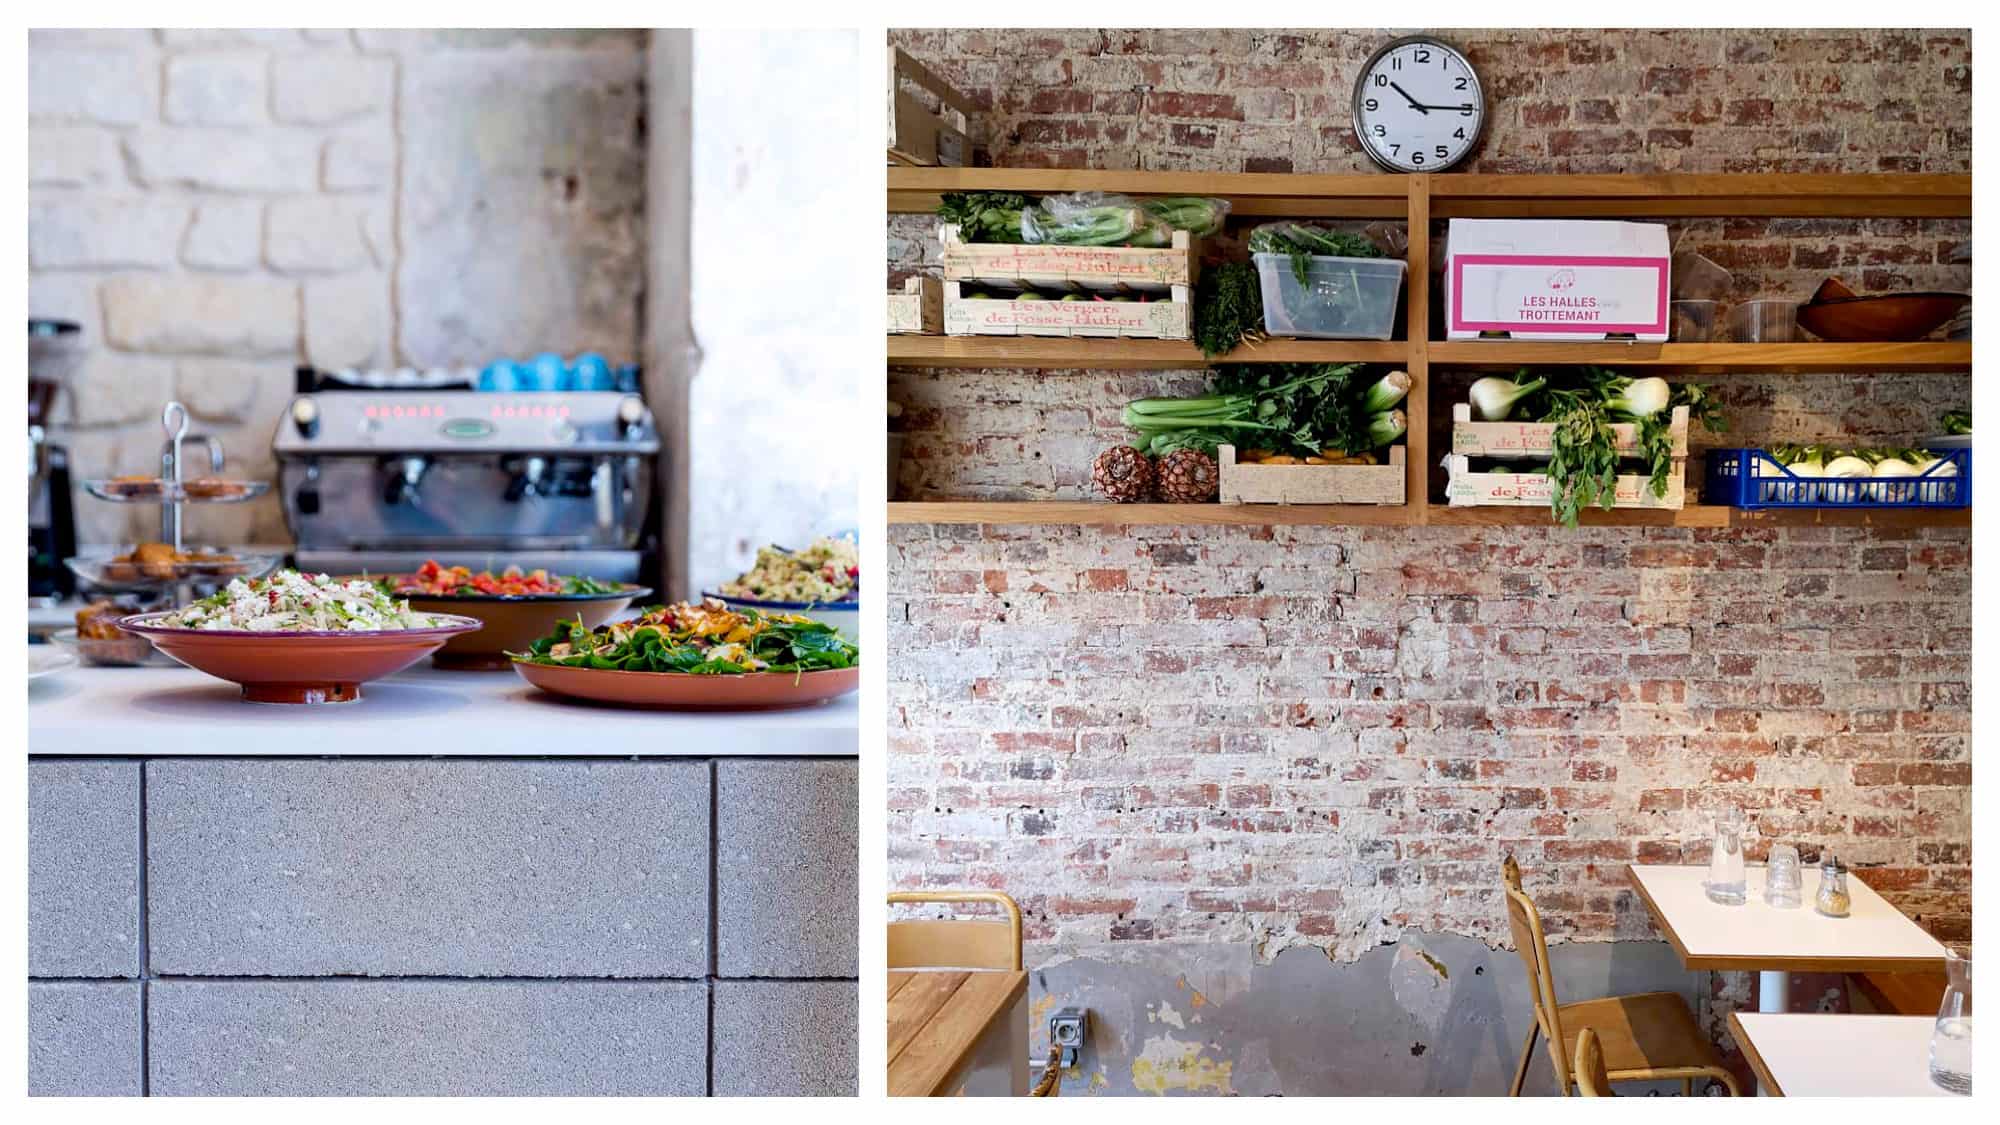 Big bowls of salads on the counter of IMA, a veggie café in Paris (left) and its exposed-brick interiors lined with crates of fresh produce on wooden shelves (right).